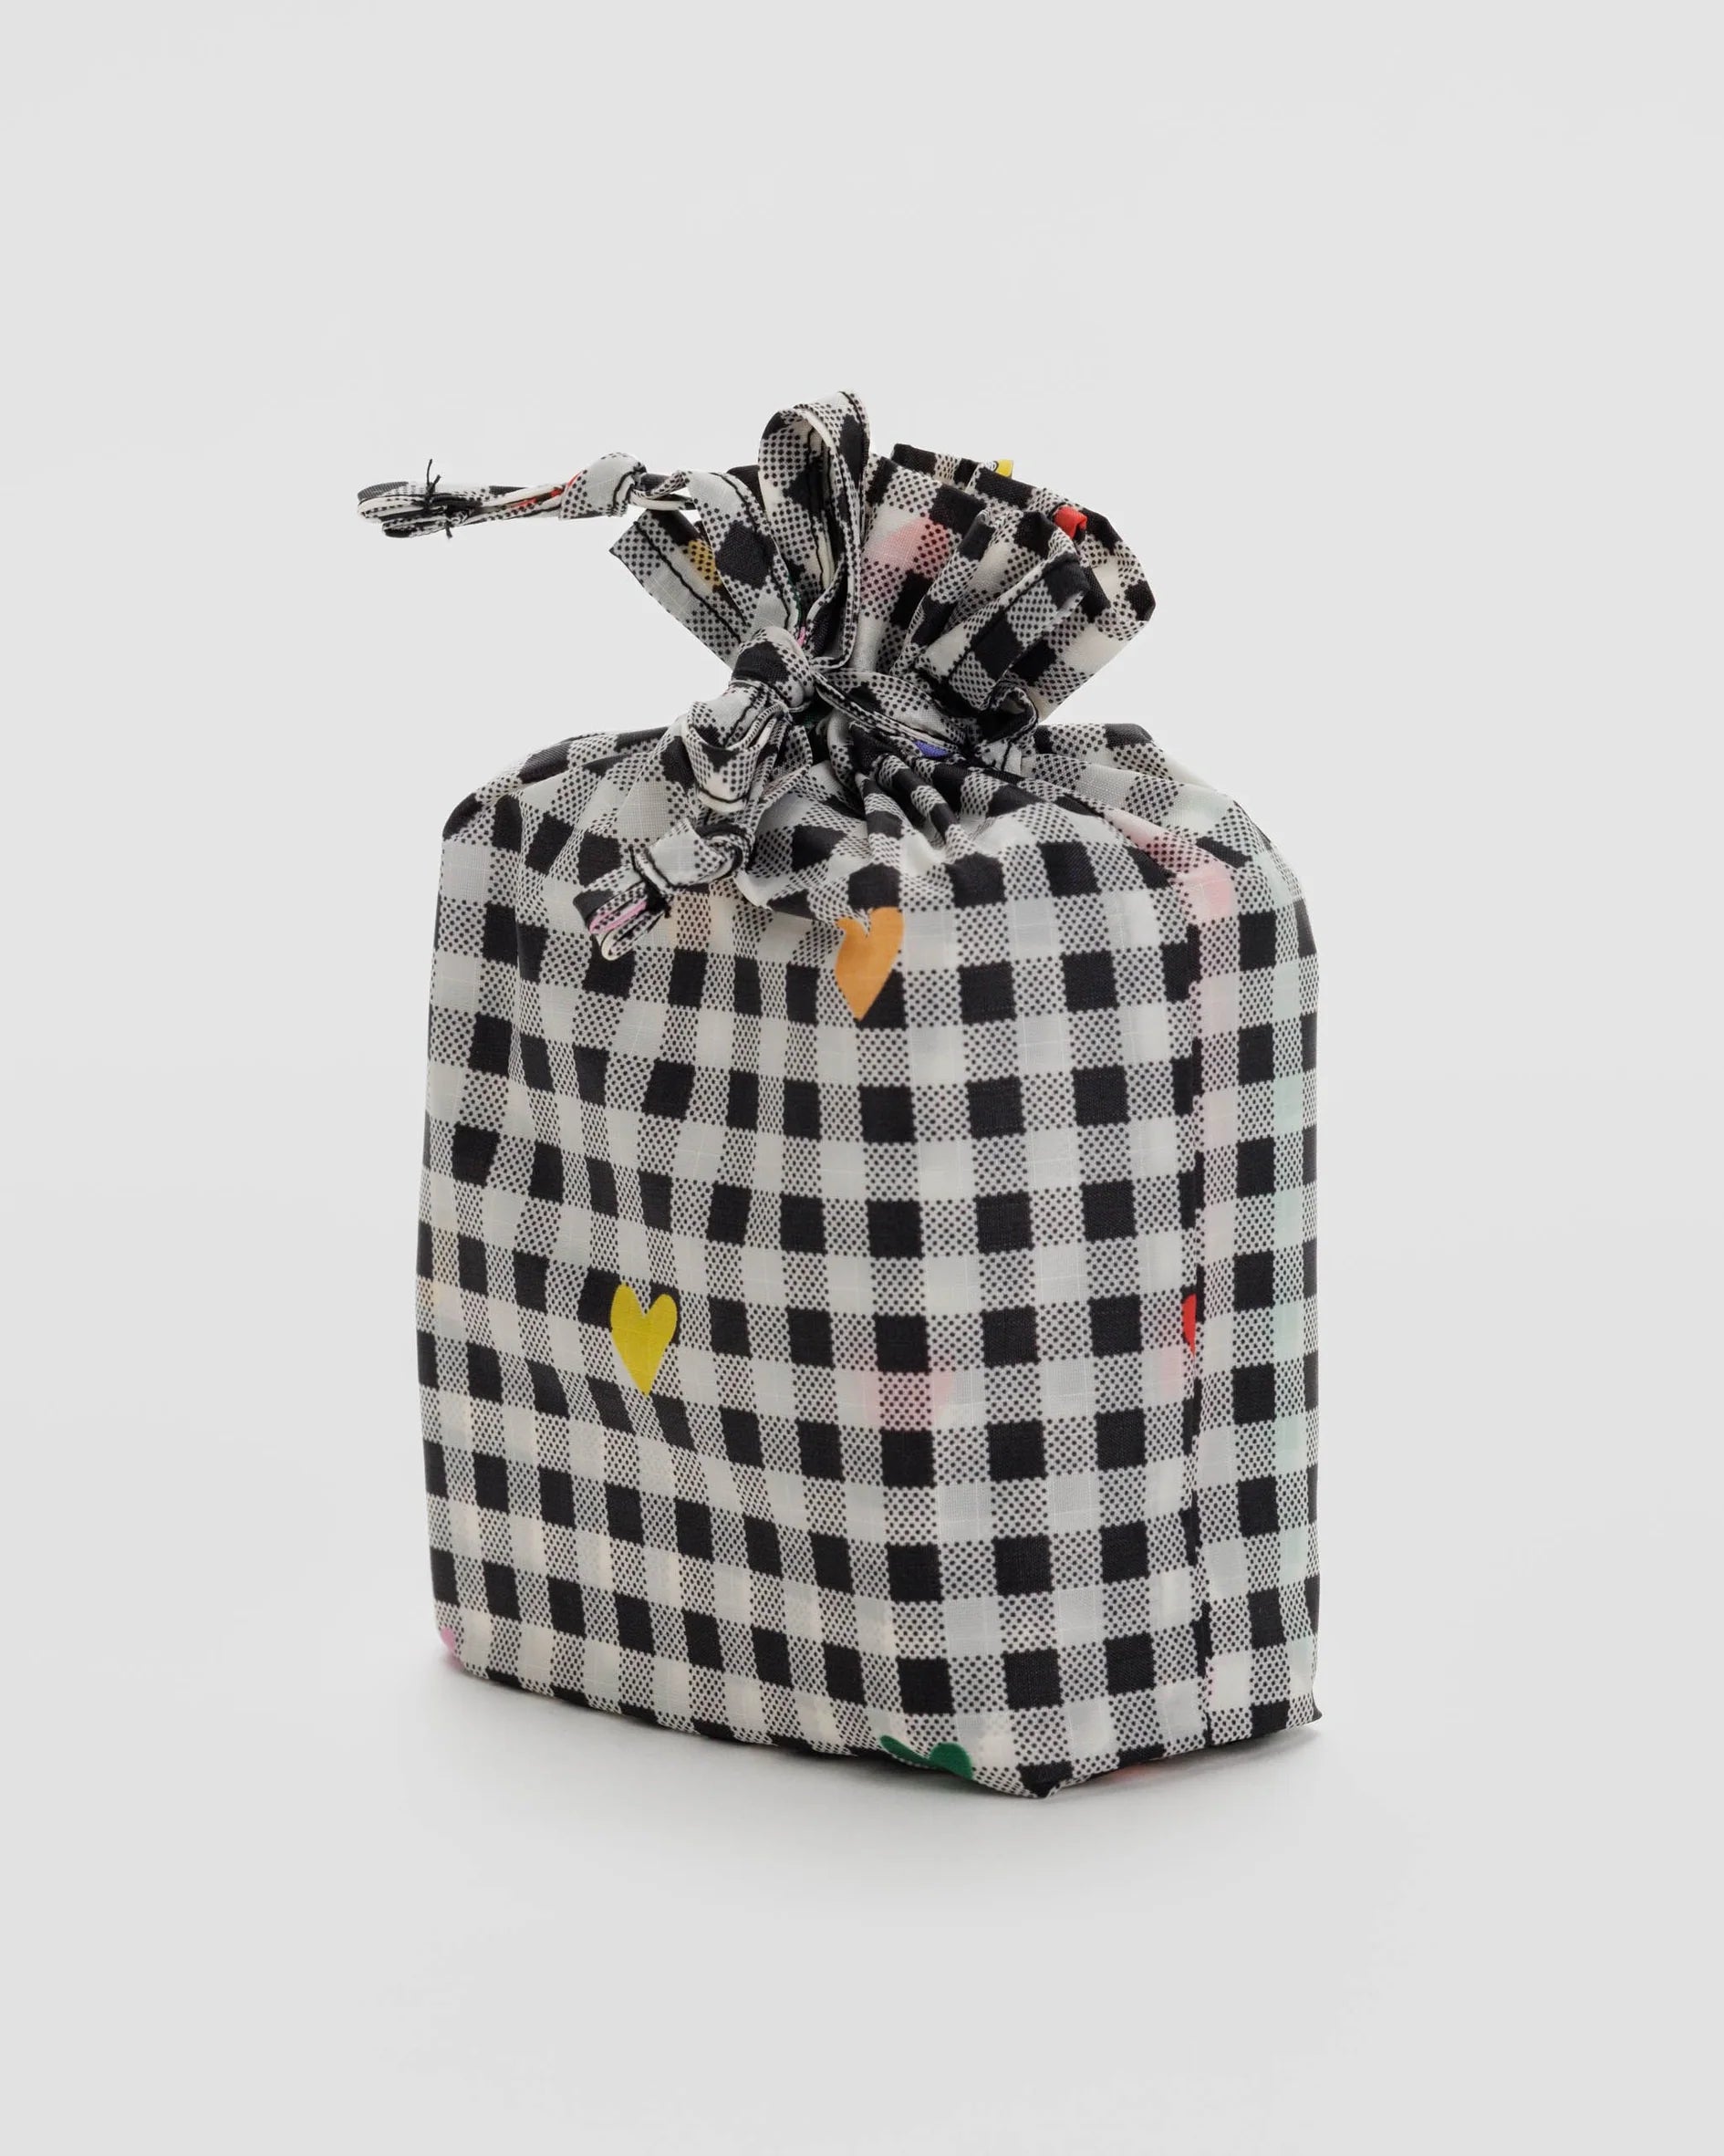 Standard Baggu Set of 3 - Gingham | Collective Request 